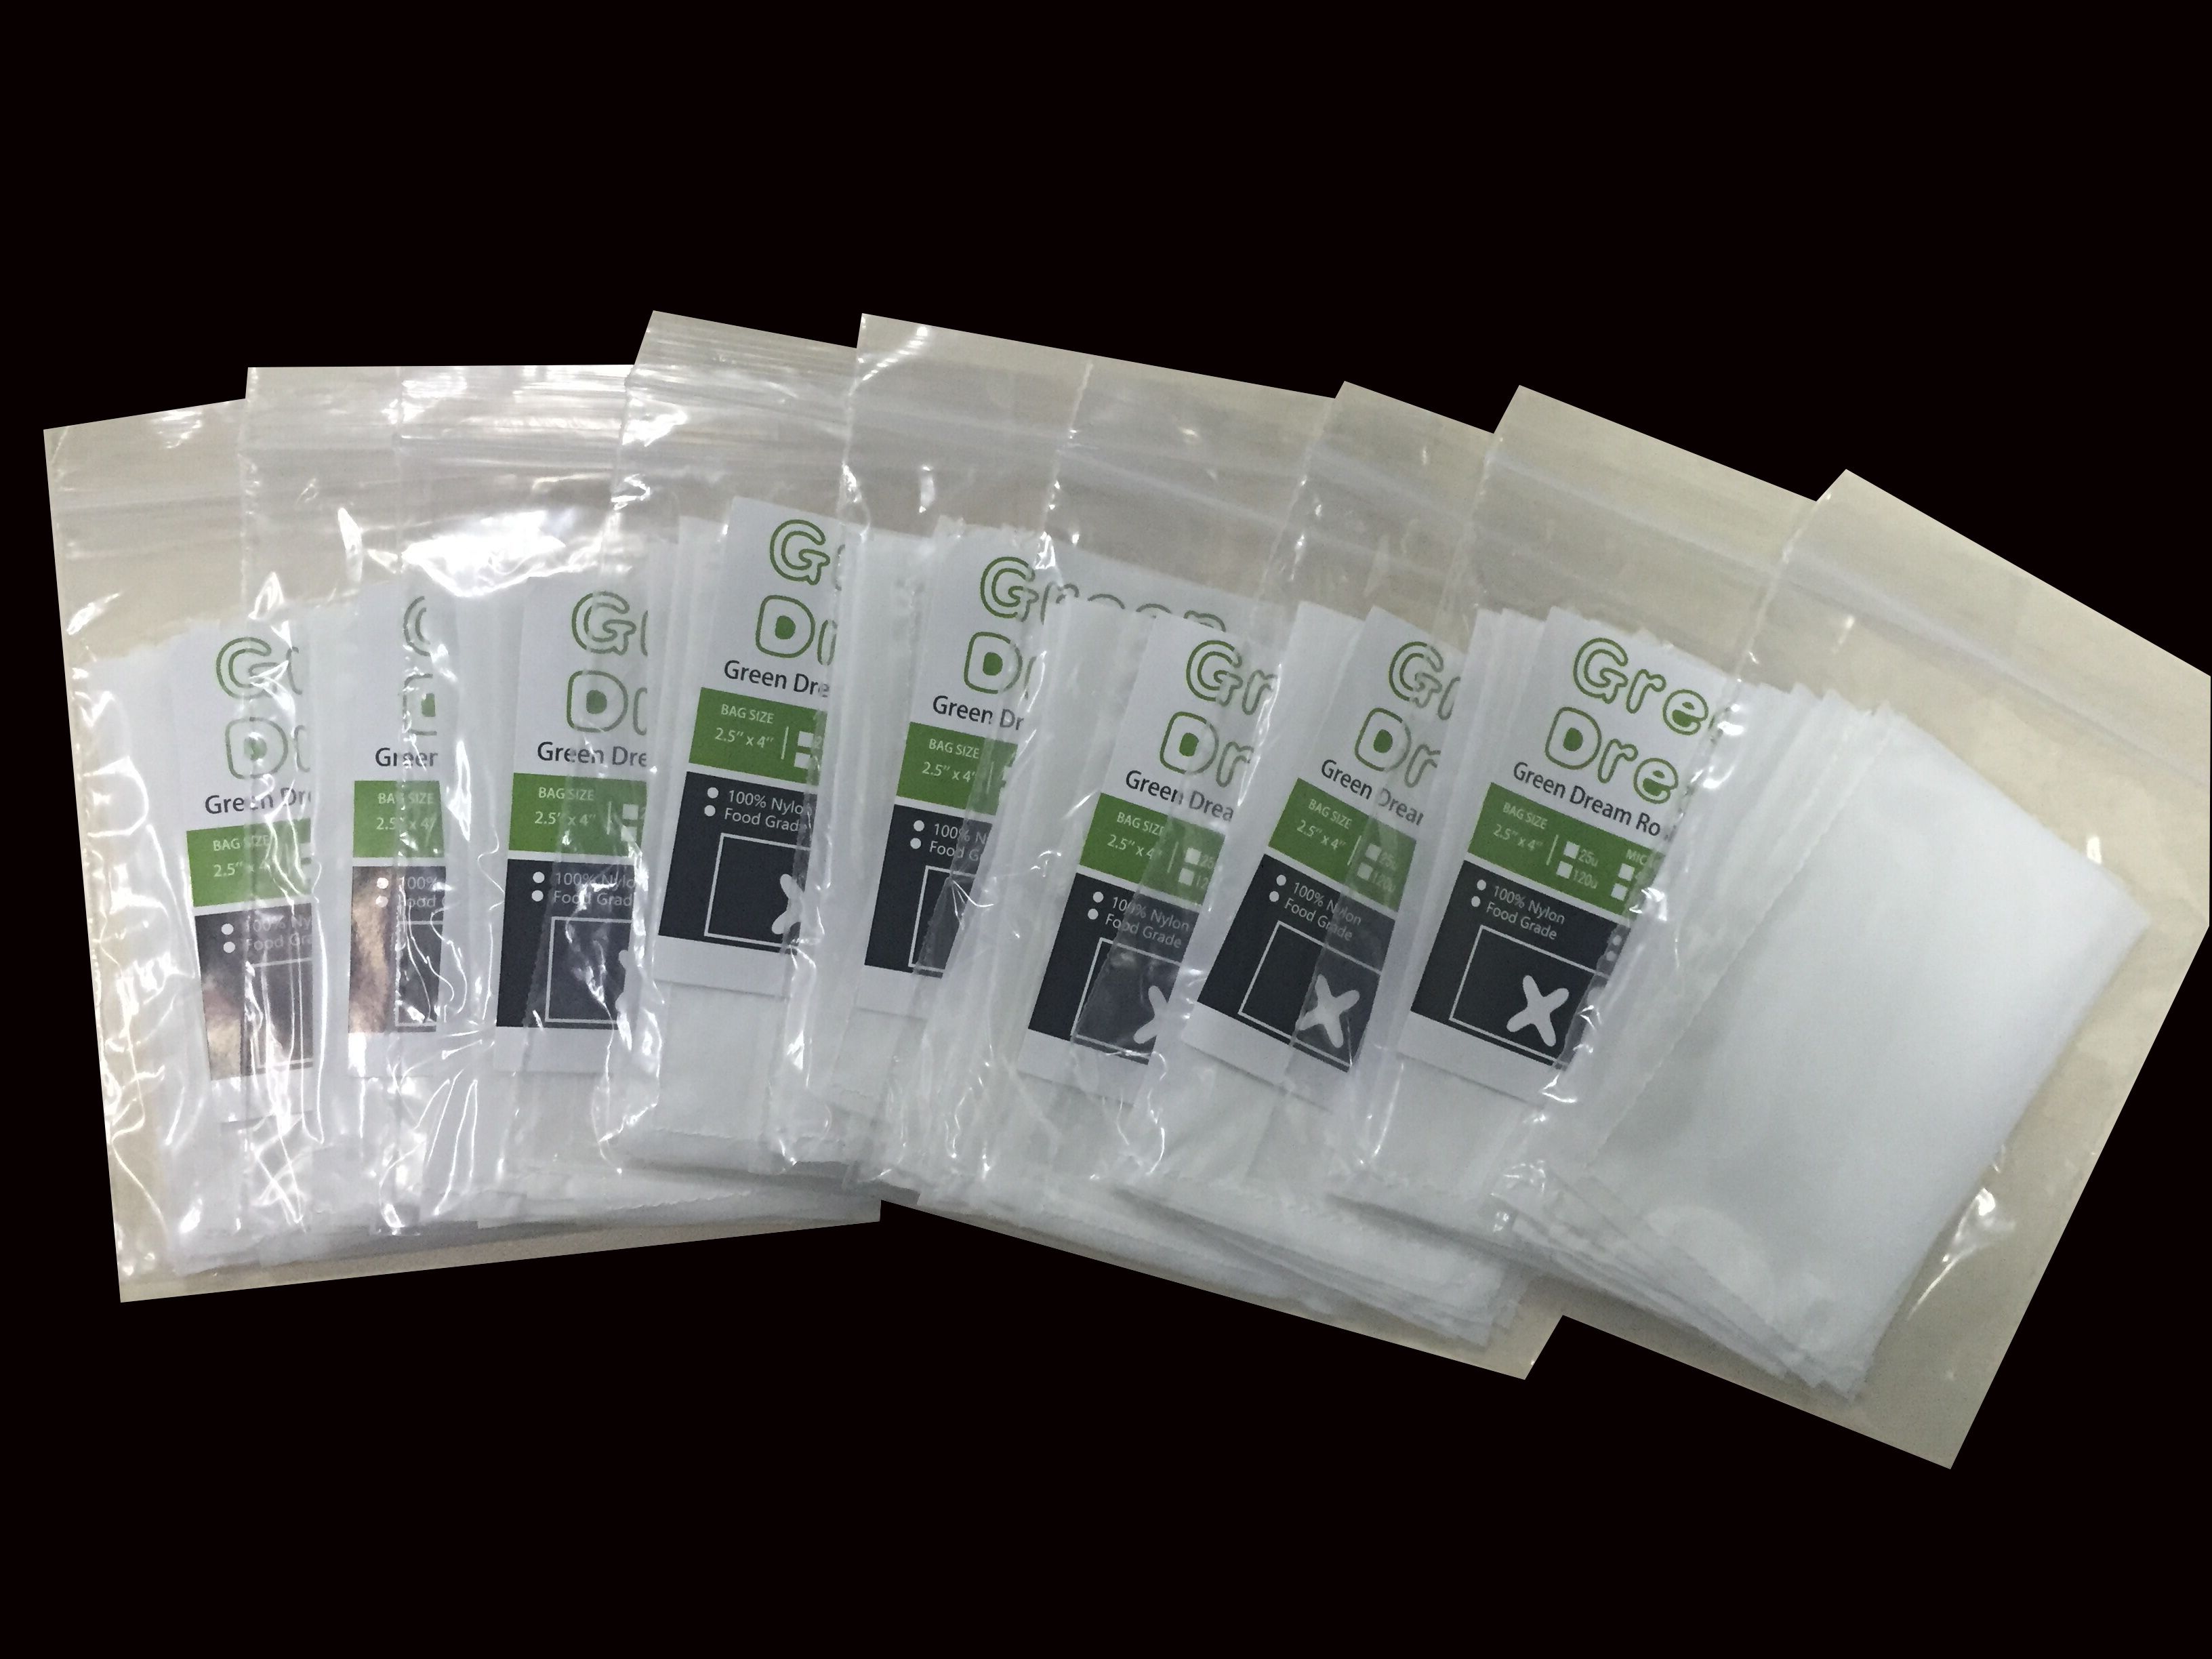 How To Pack Rosin Filter Bags